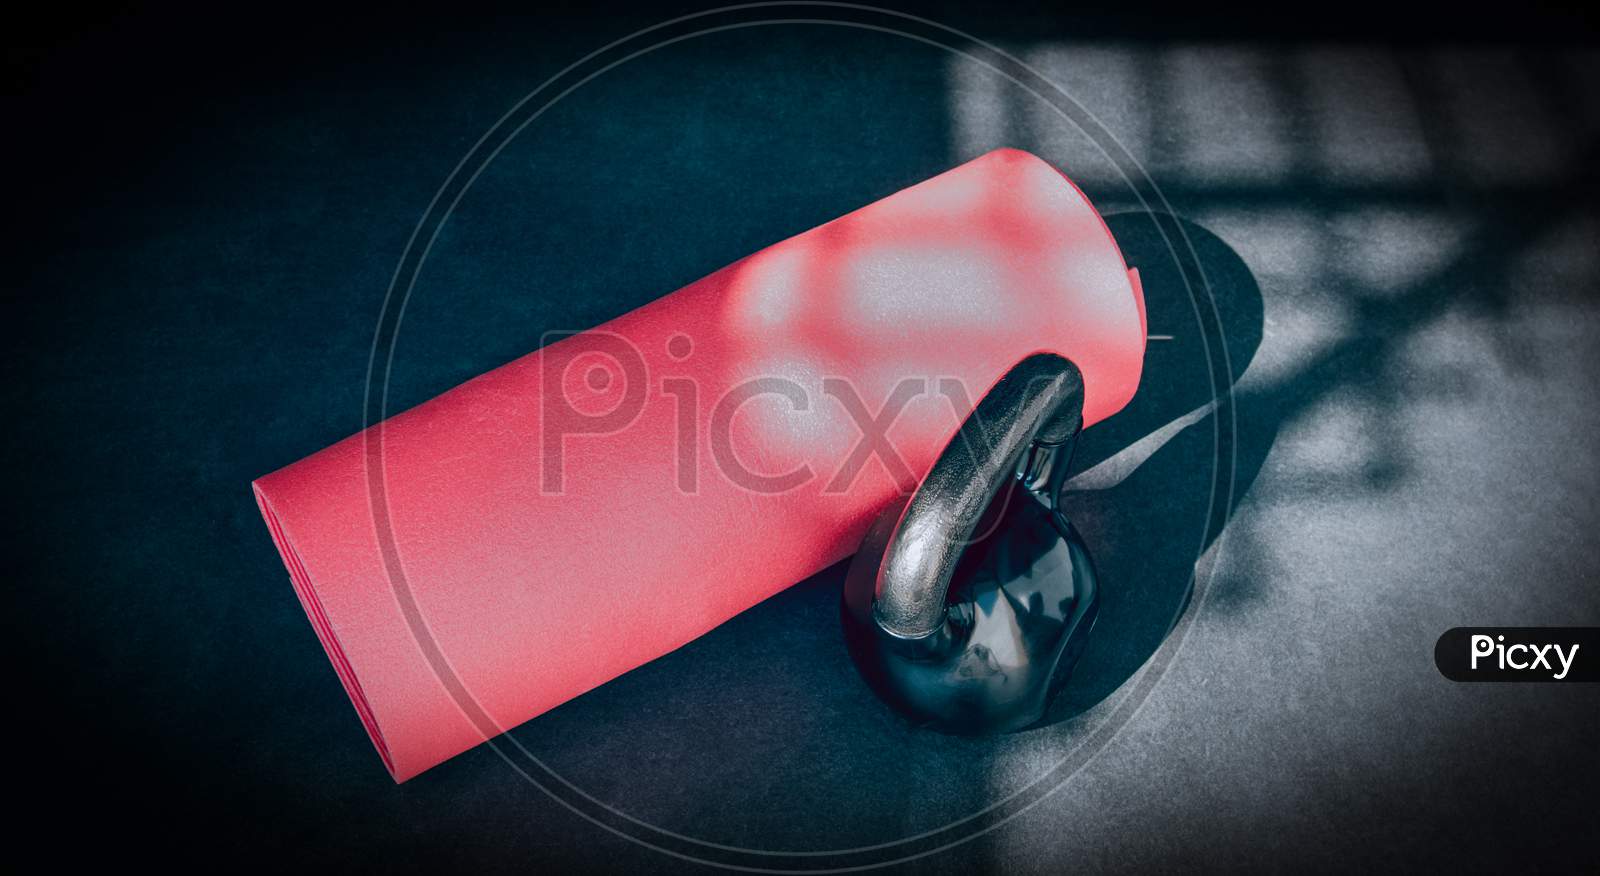 Kettlebell and red gym mat, physical activity and sport